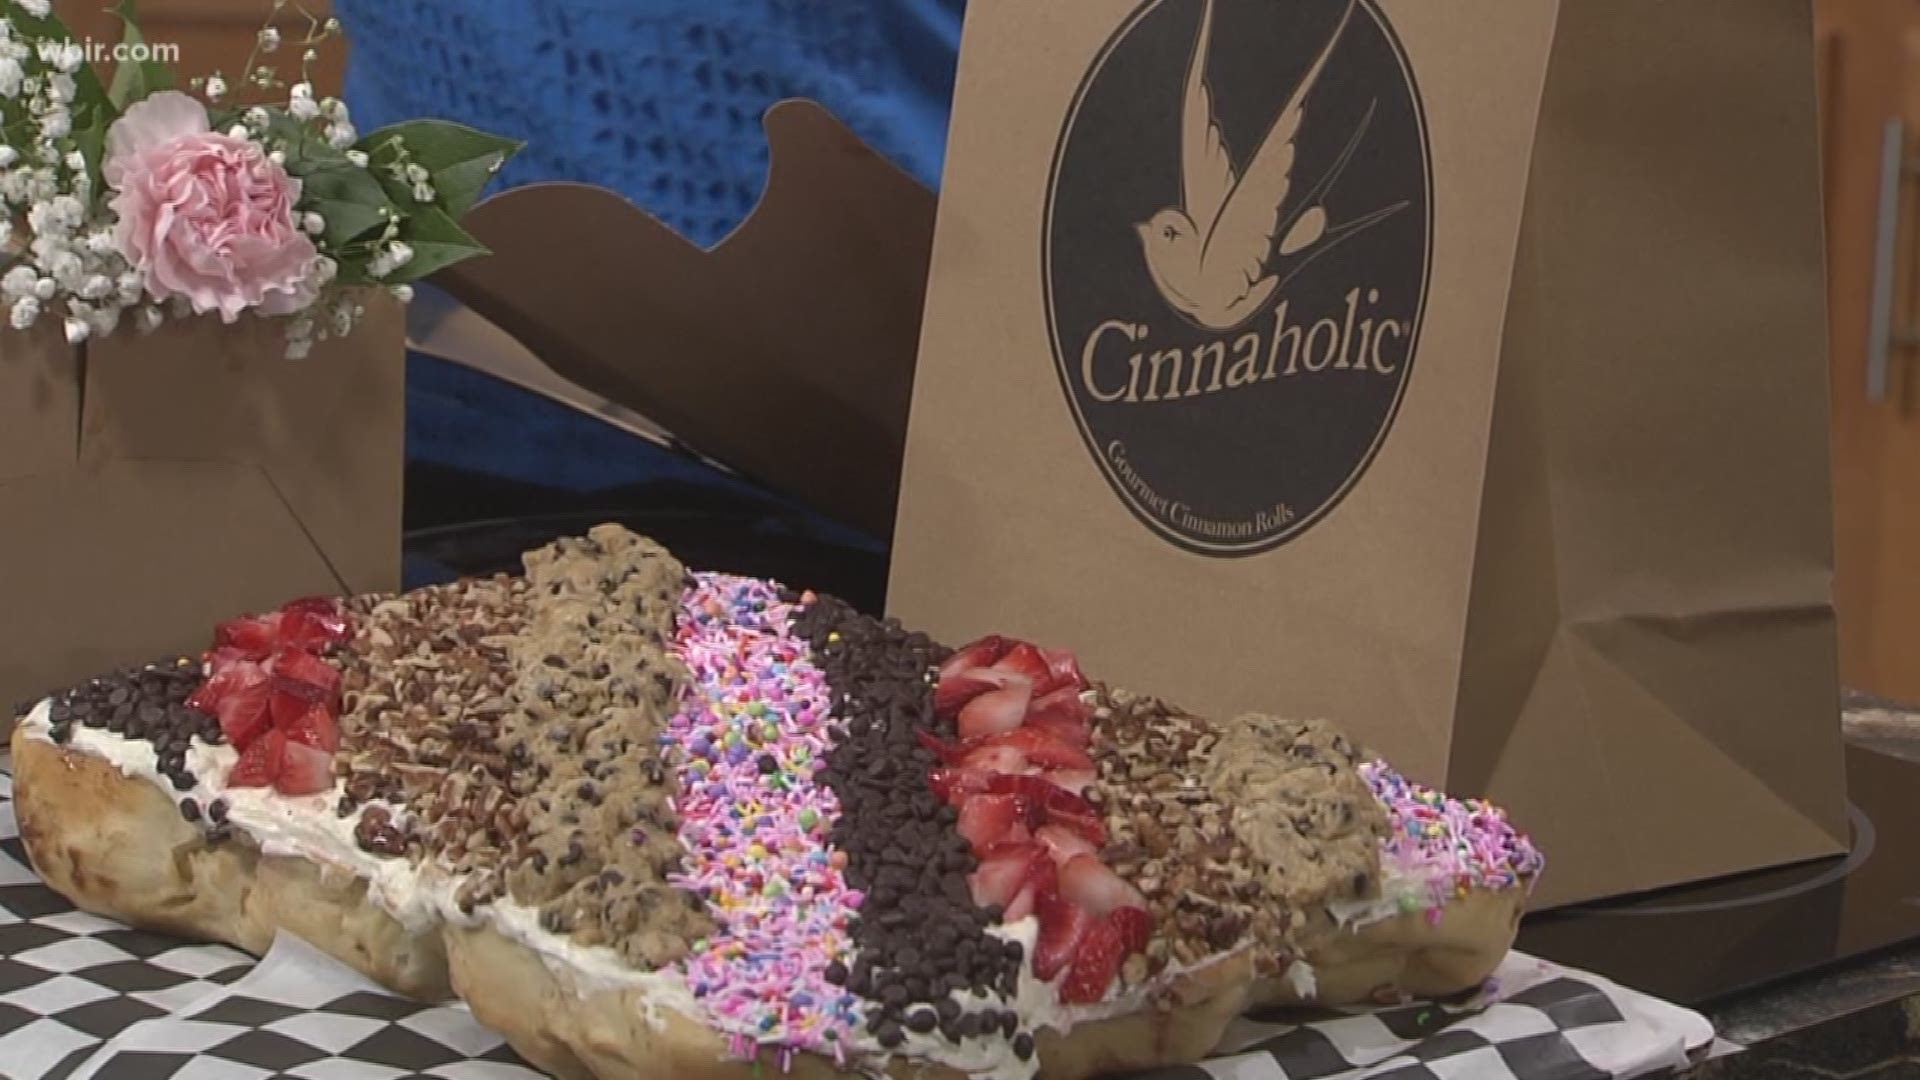 Cinnaholic brought some sweet treats for Mother's Day!